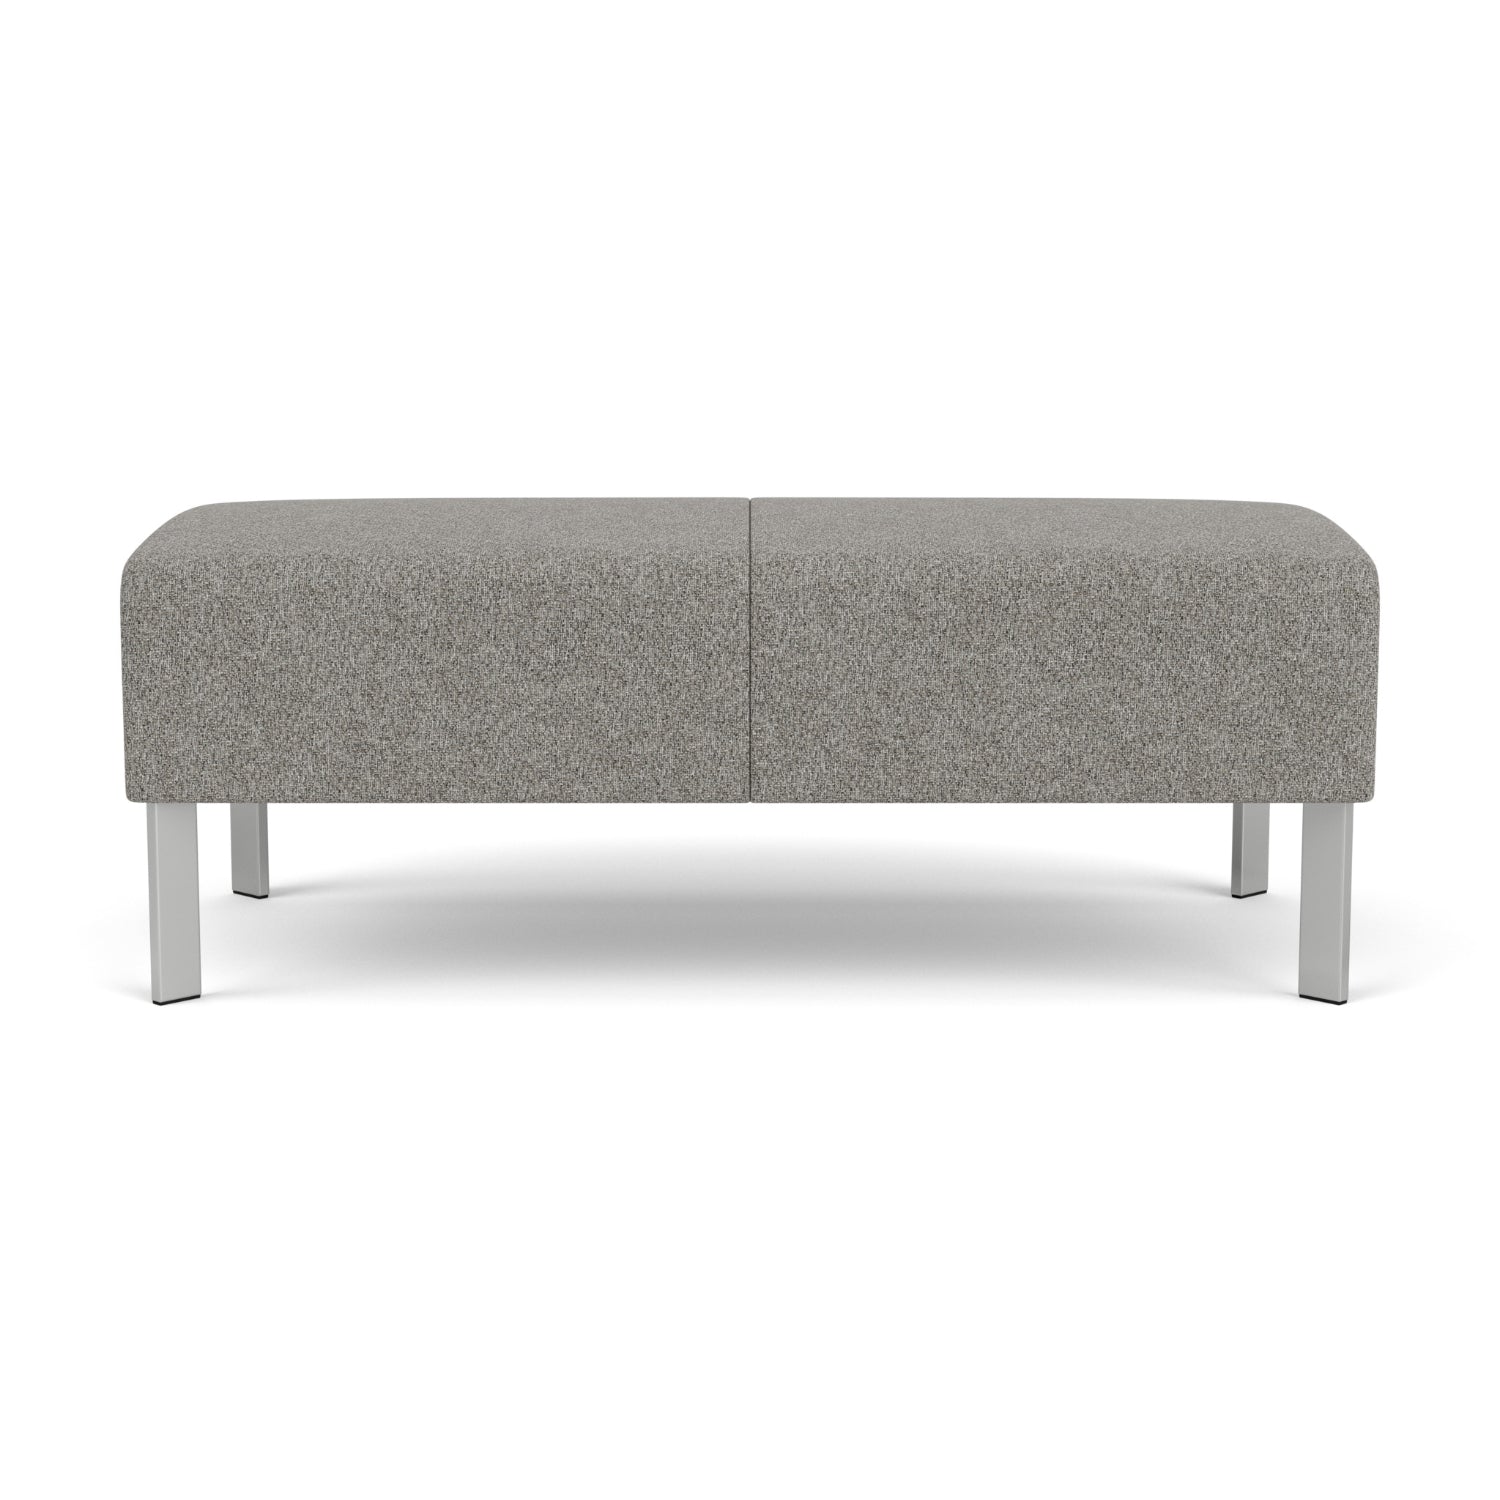 Luxe Collection Reception Seating, 2 Seat Bench, Standard Fabric Upholstery, FREE SHIPPING